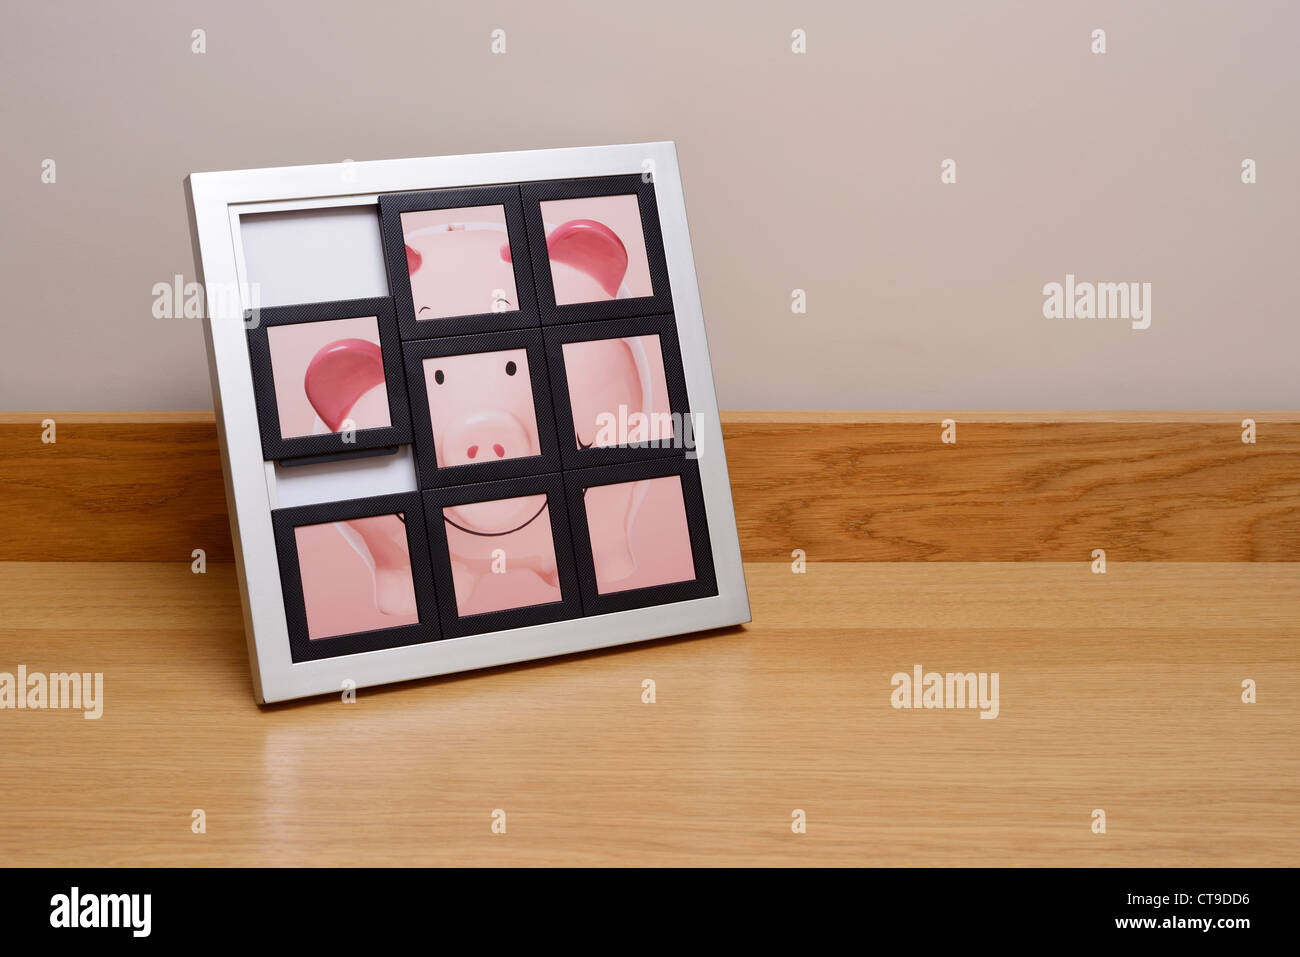 Piggy bank in a slide picture frame Stock Photo